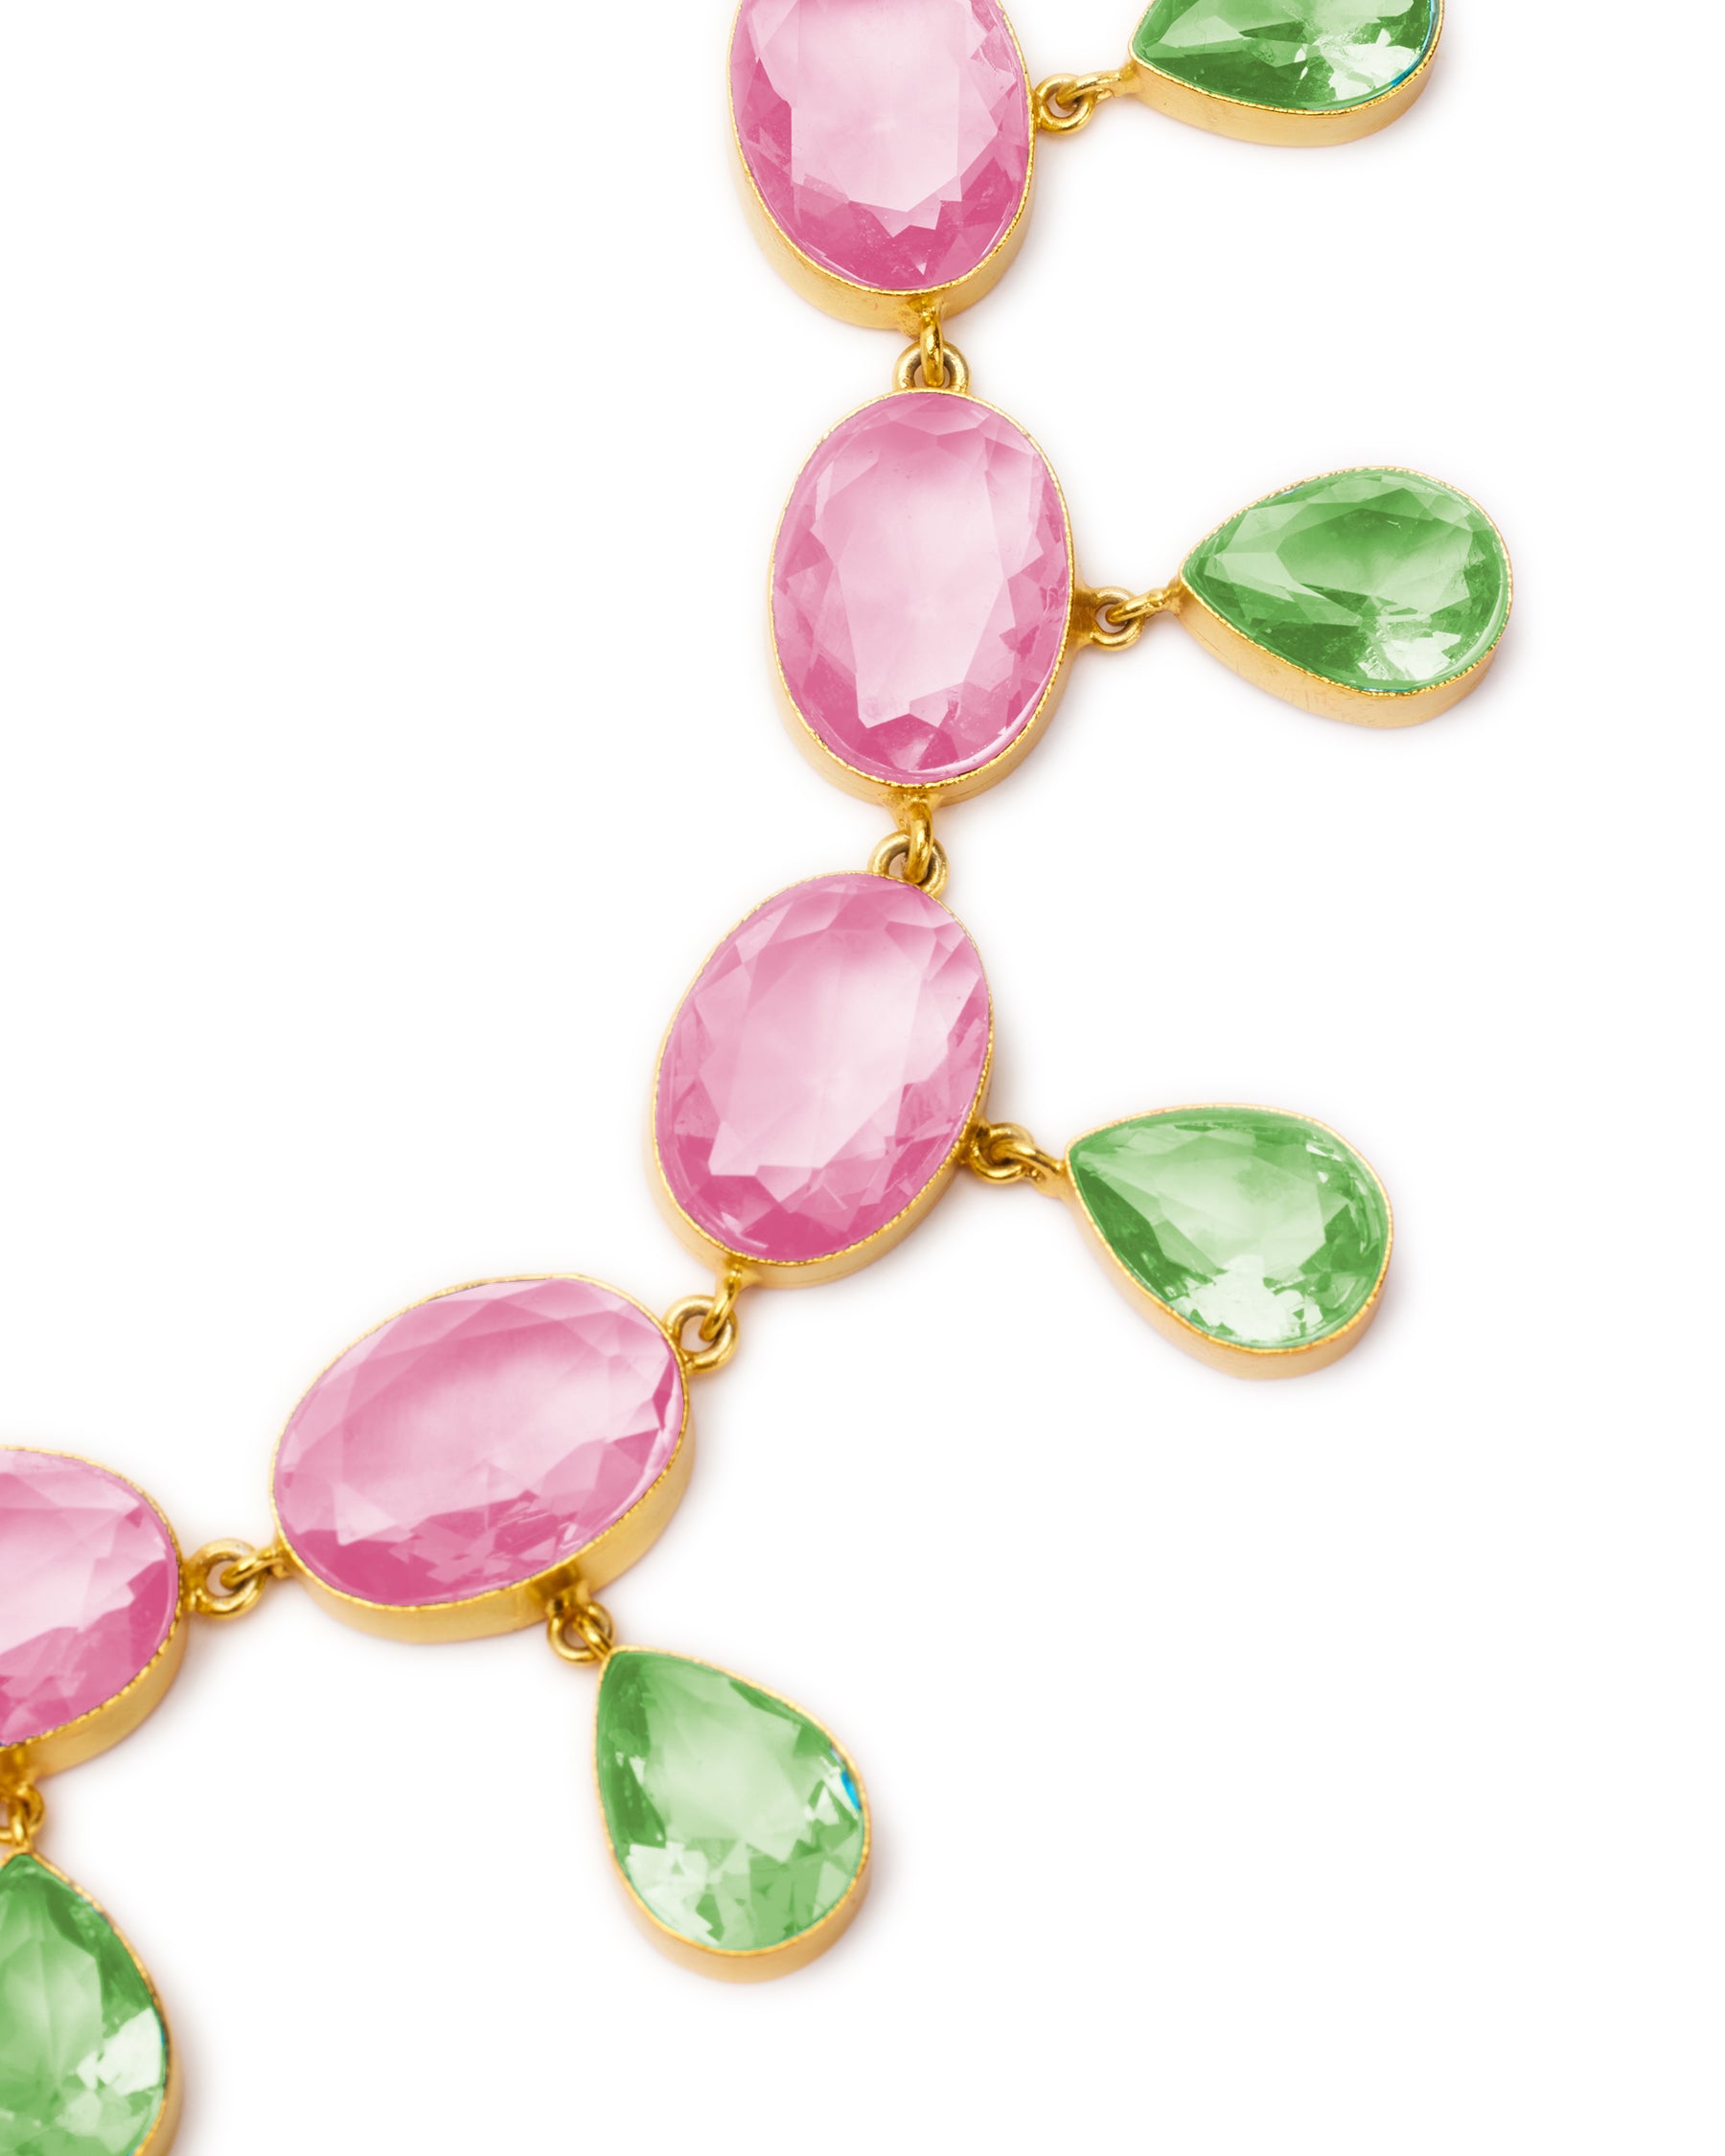 Chiara Dewdrop Necklace in Blush Pink and Mint Green-Detail